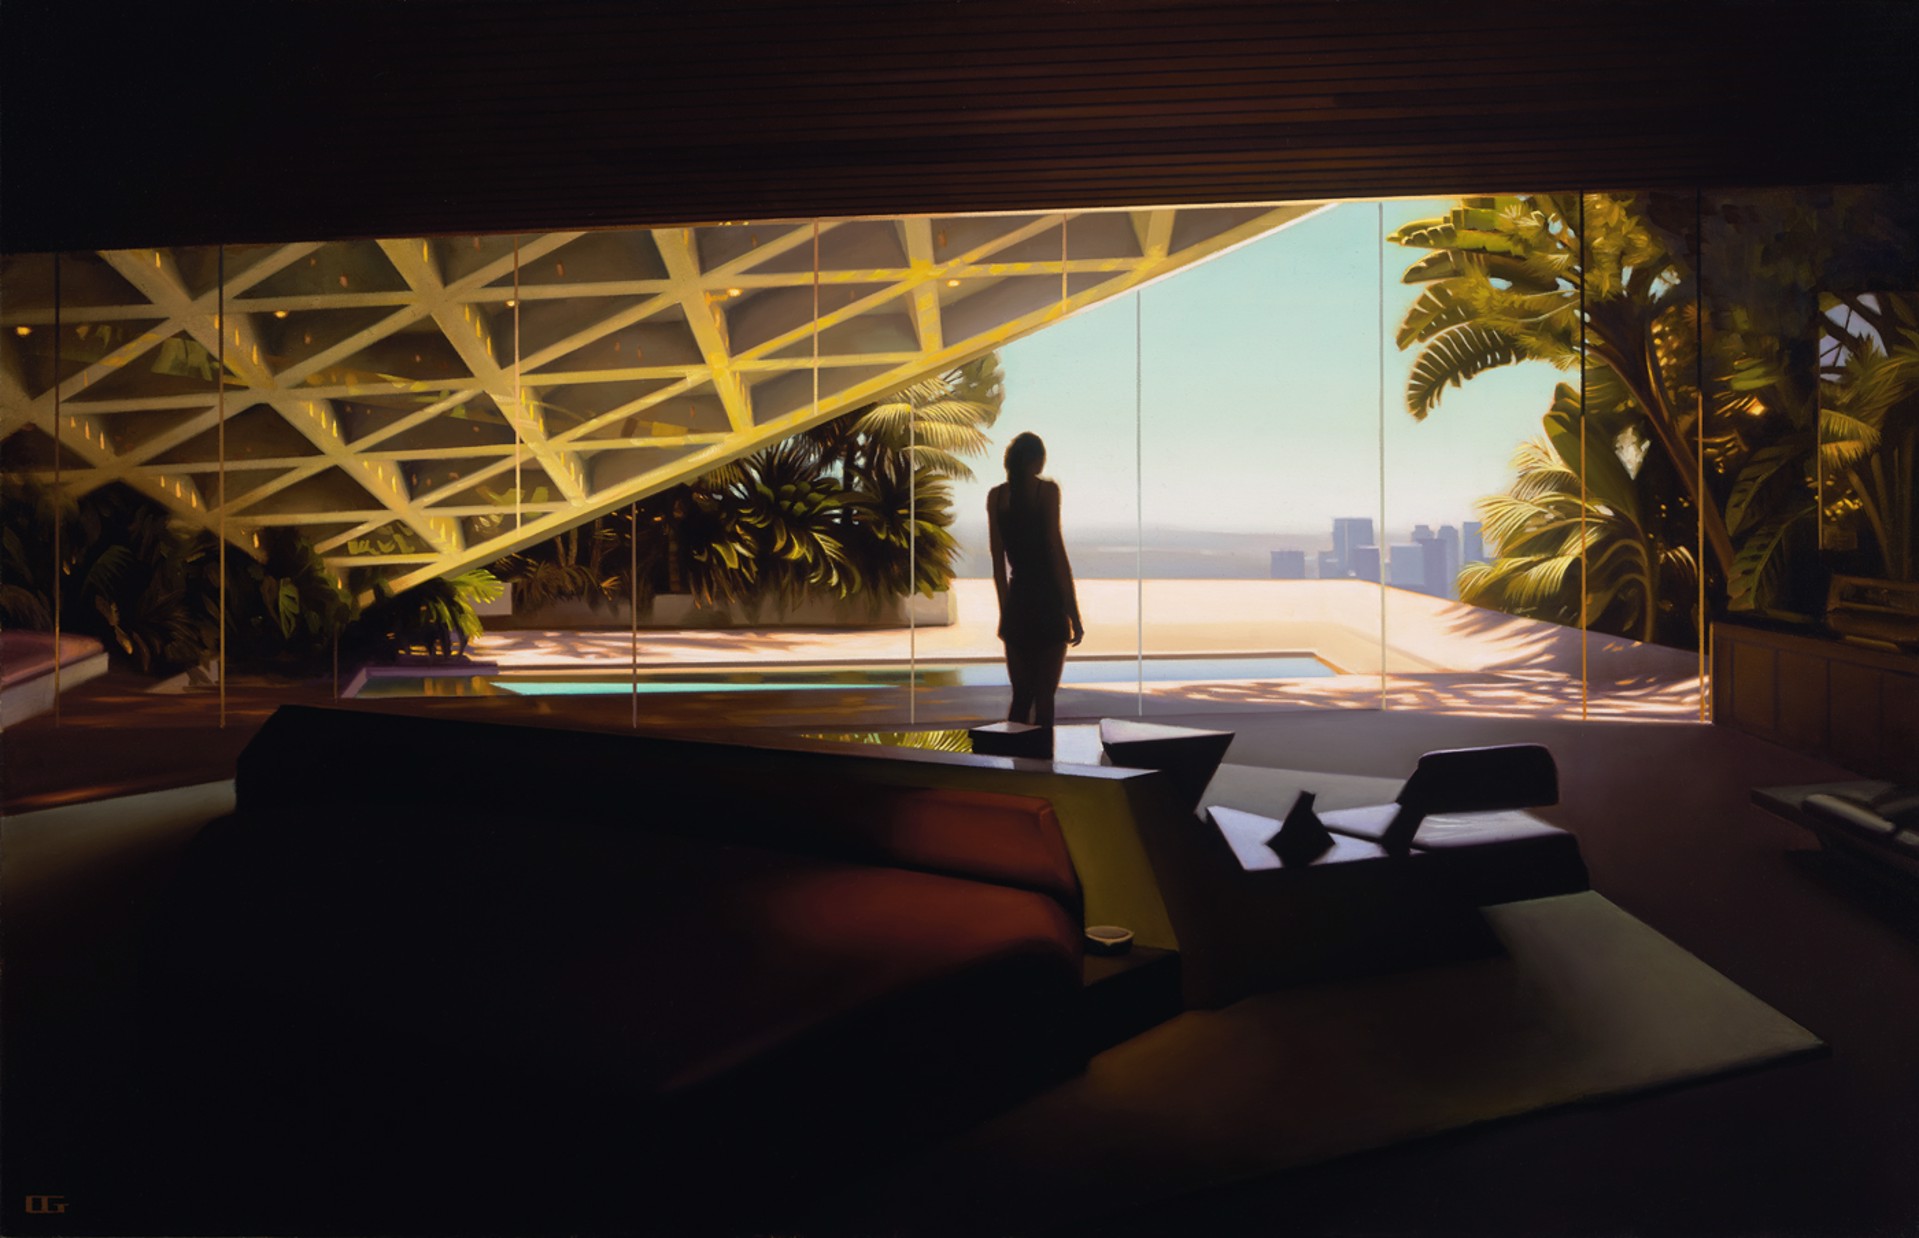 What the Future Holds (Sheats-Goldstein Residence) by Carrie Graber